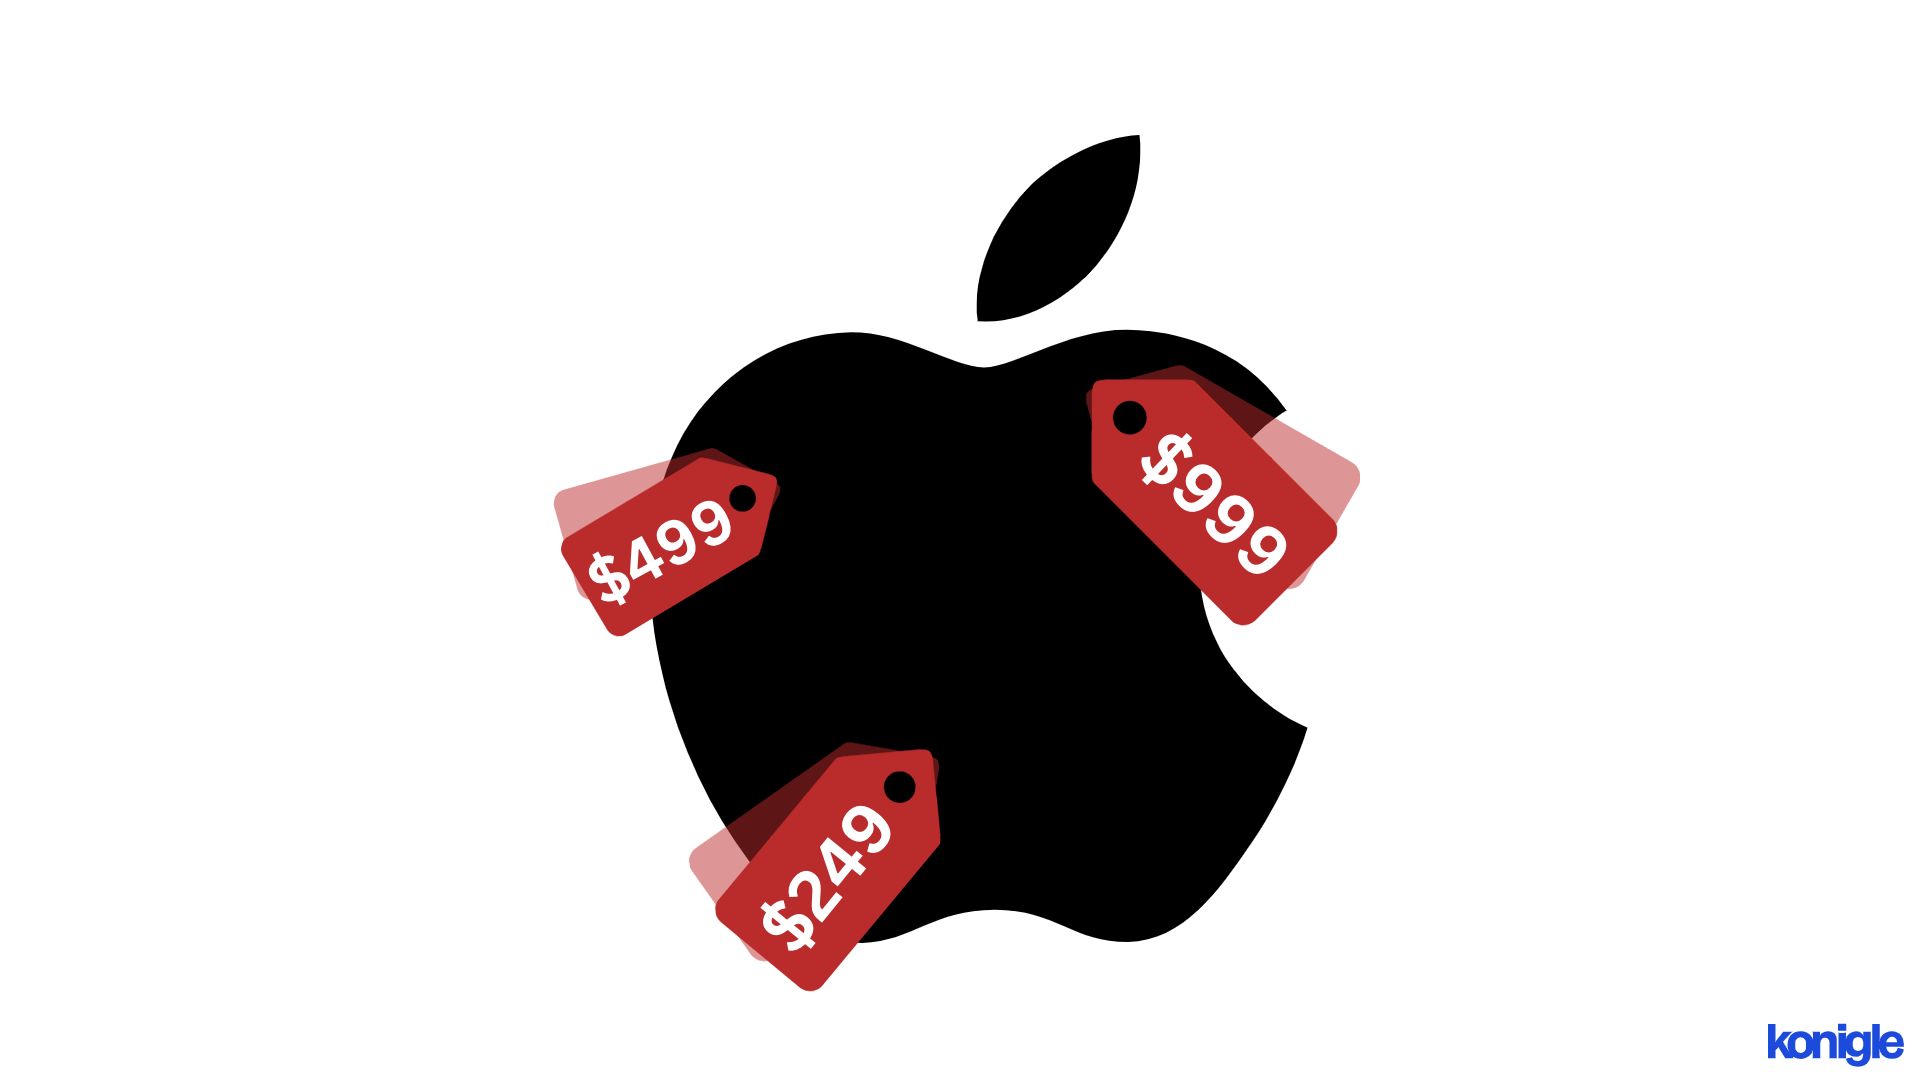 Follow Apple in pricing your products like this to boost revenue.